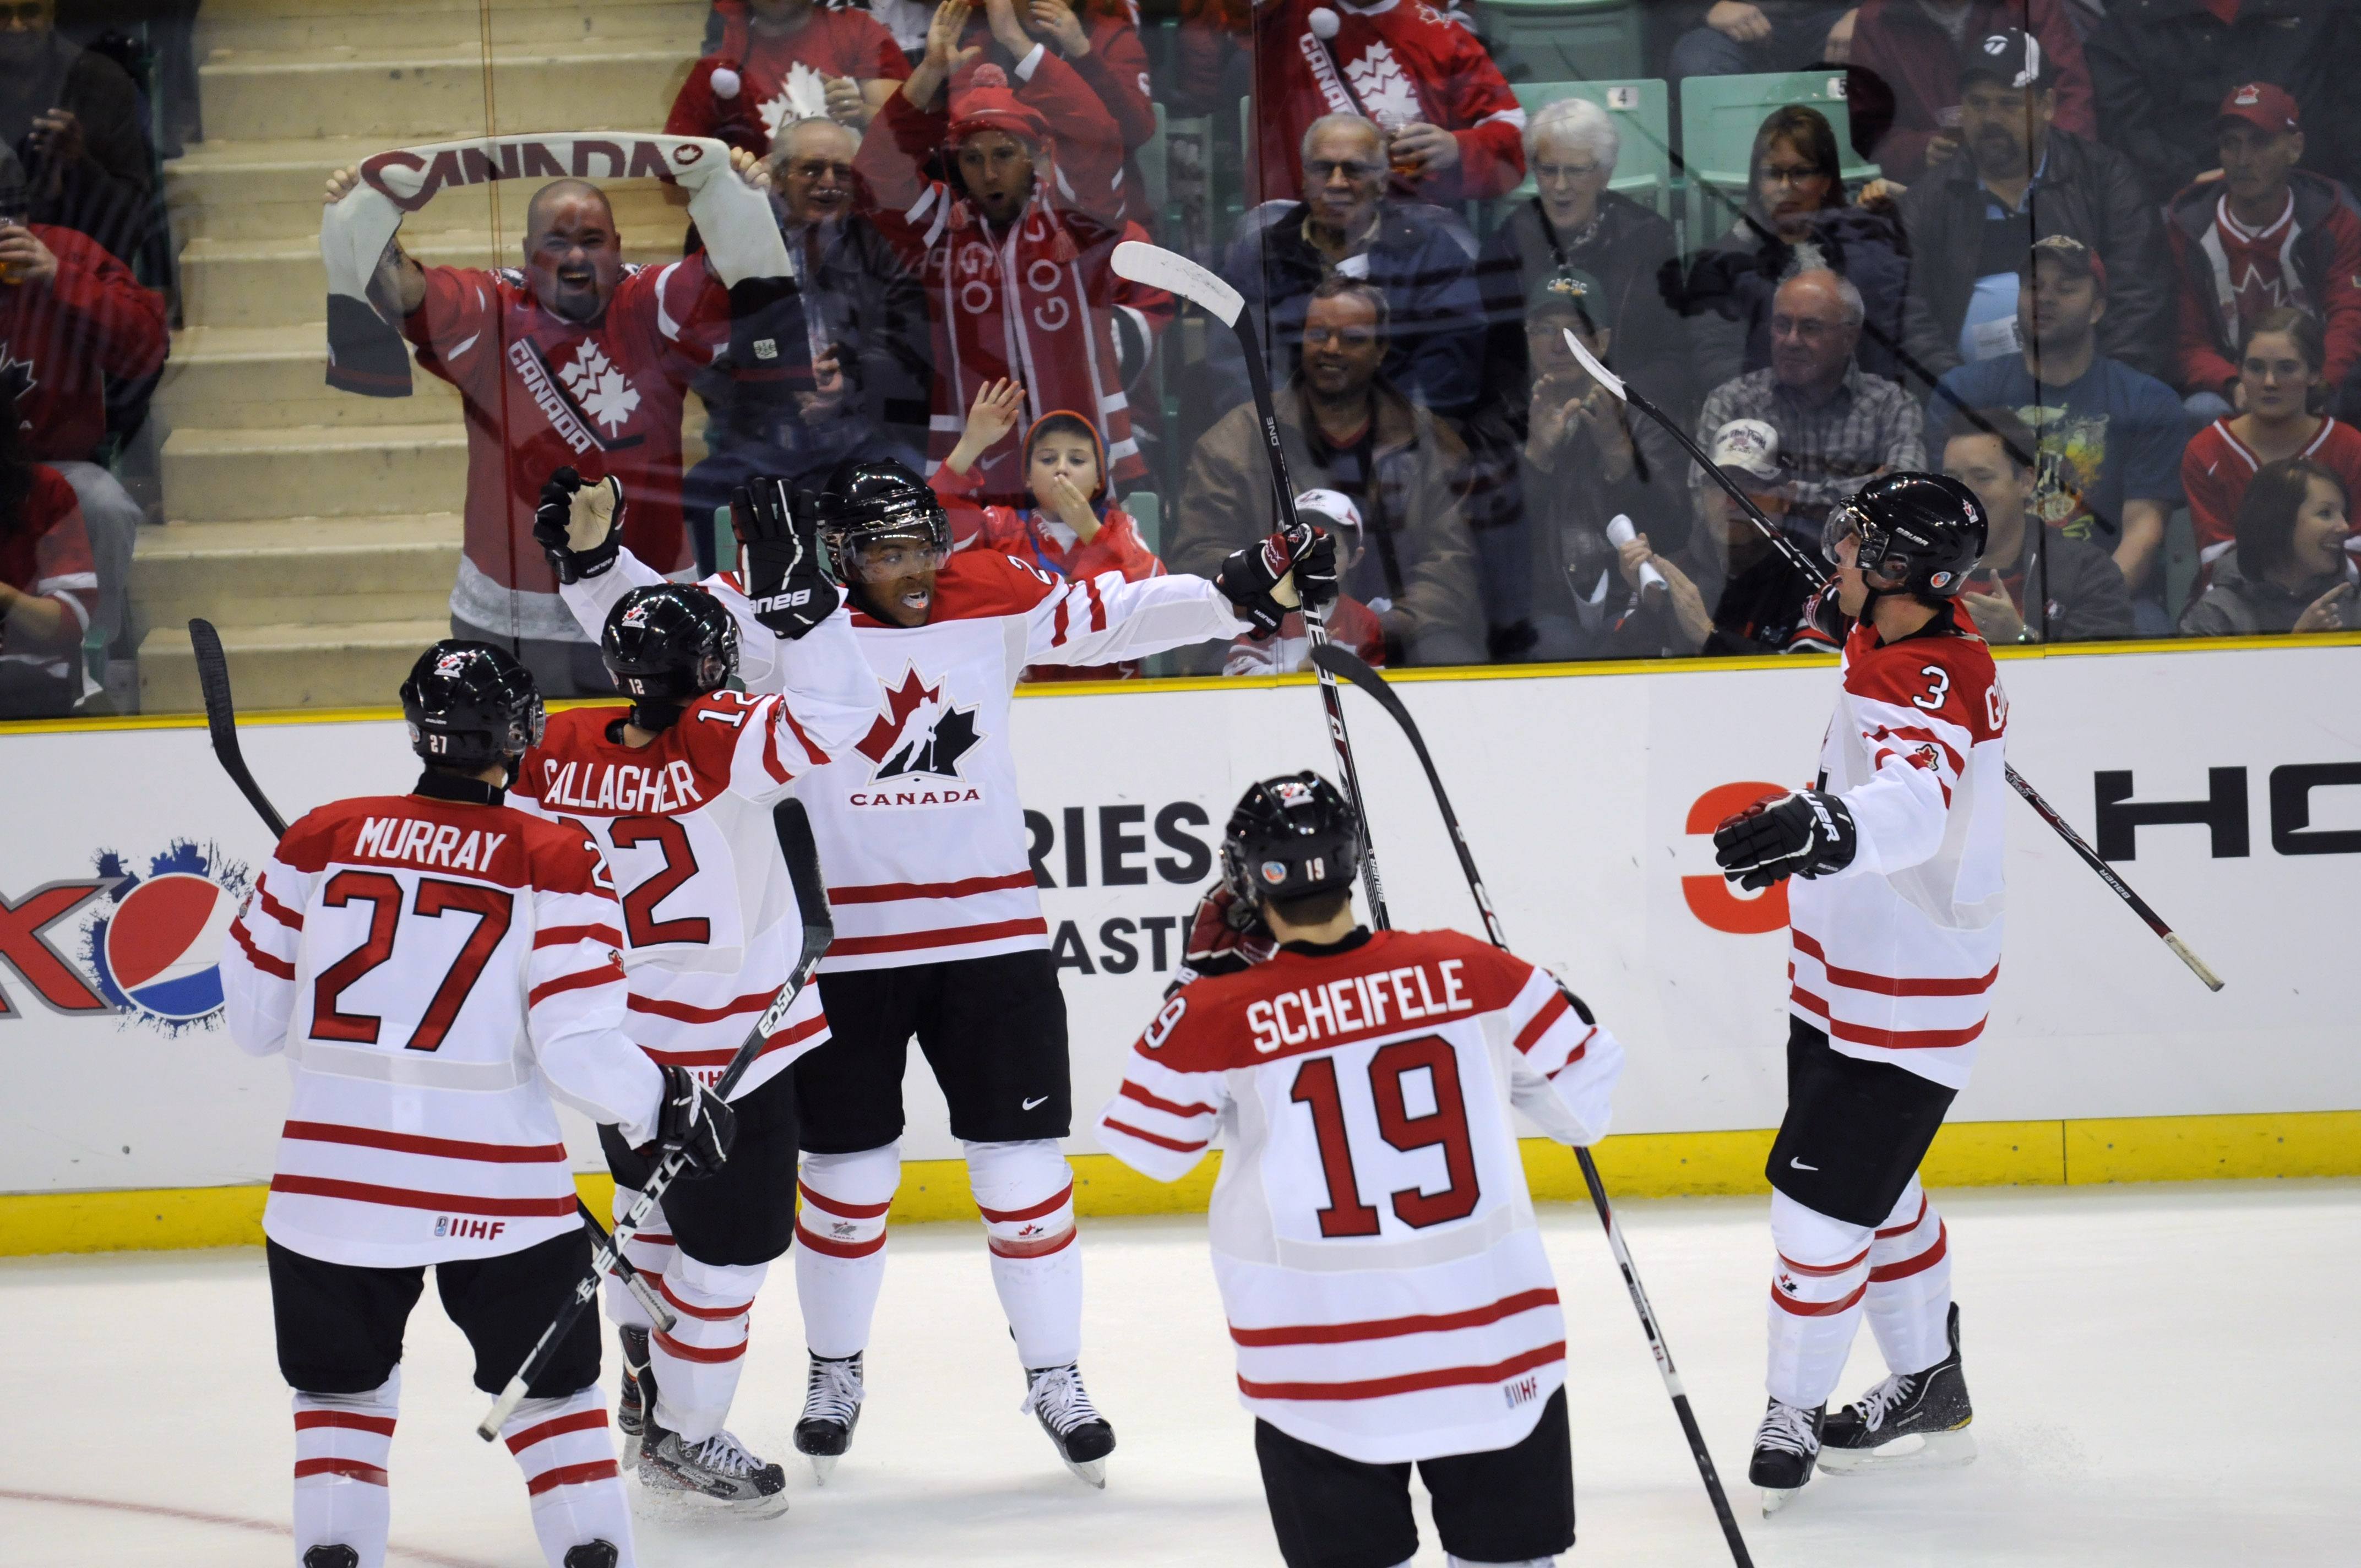 GOAL- Team Canada celebrated their first goal Thursday night during the pre-competition game of the 2012 World Junior Championship tournament at the Centrium. Canada won 7-1 Thursday night but lost 5-3 against Switzerland.